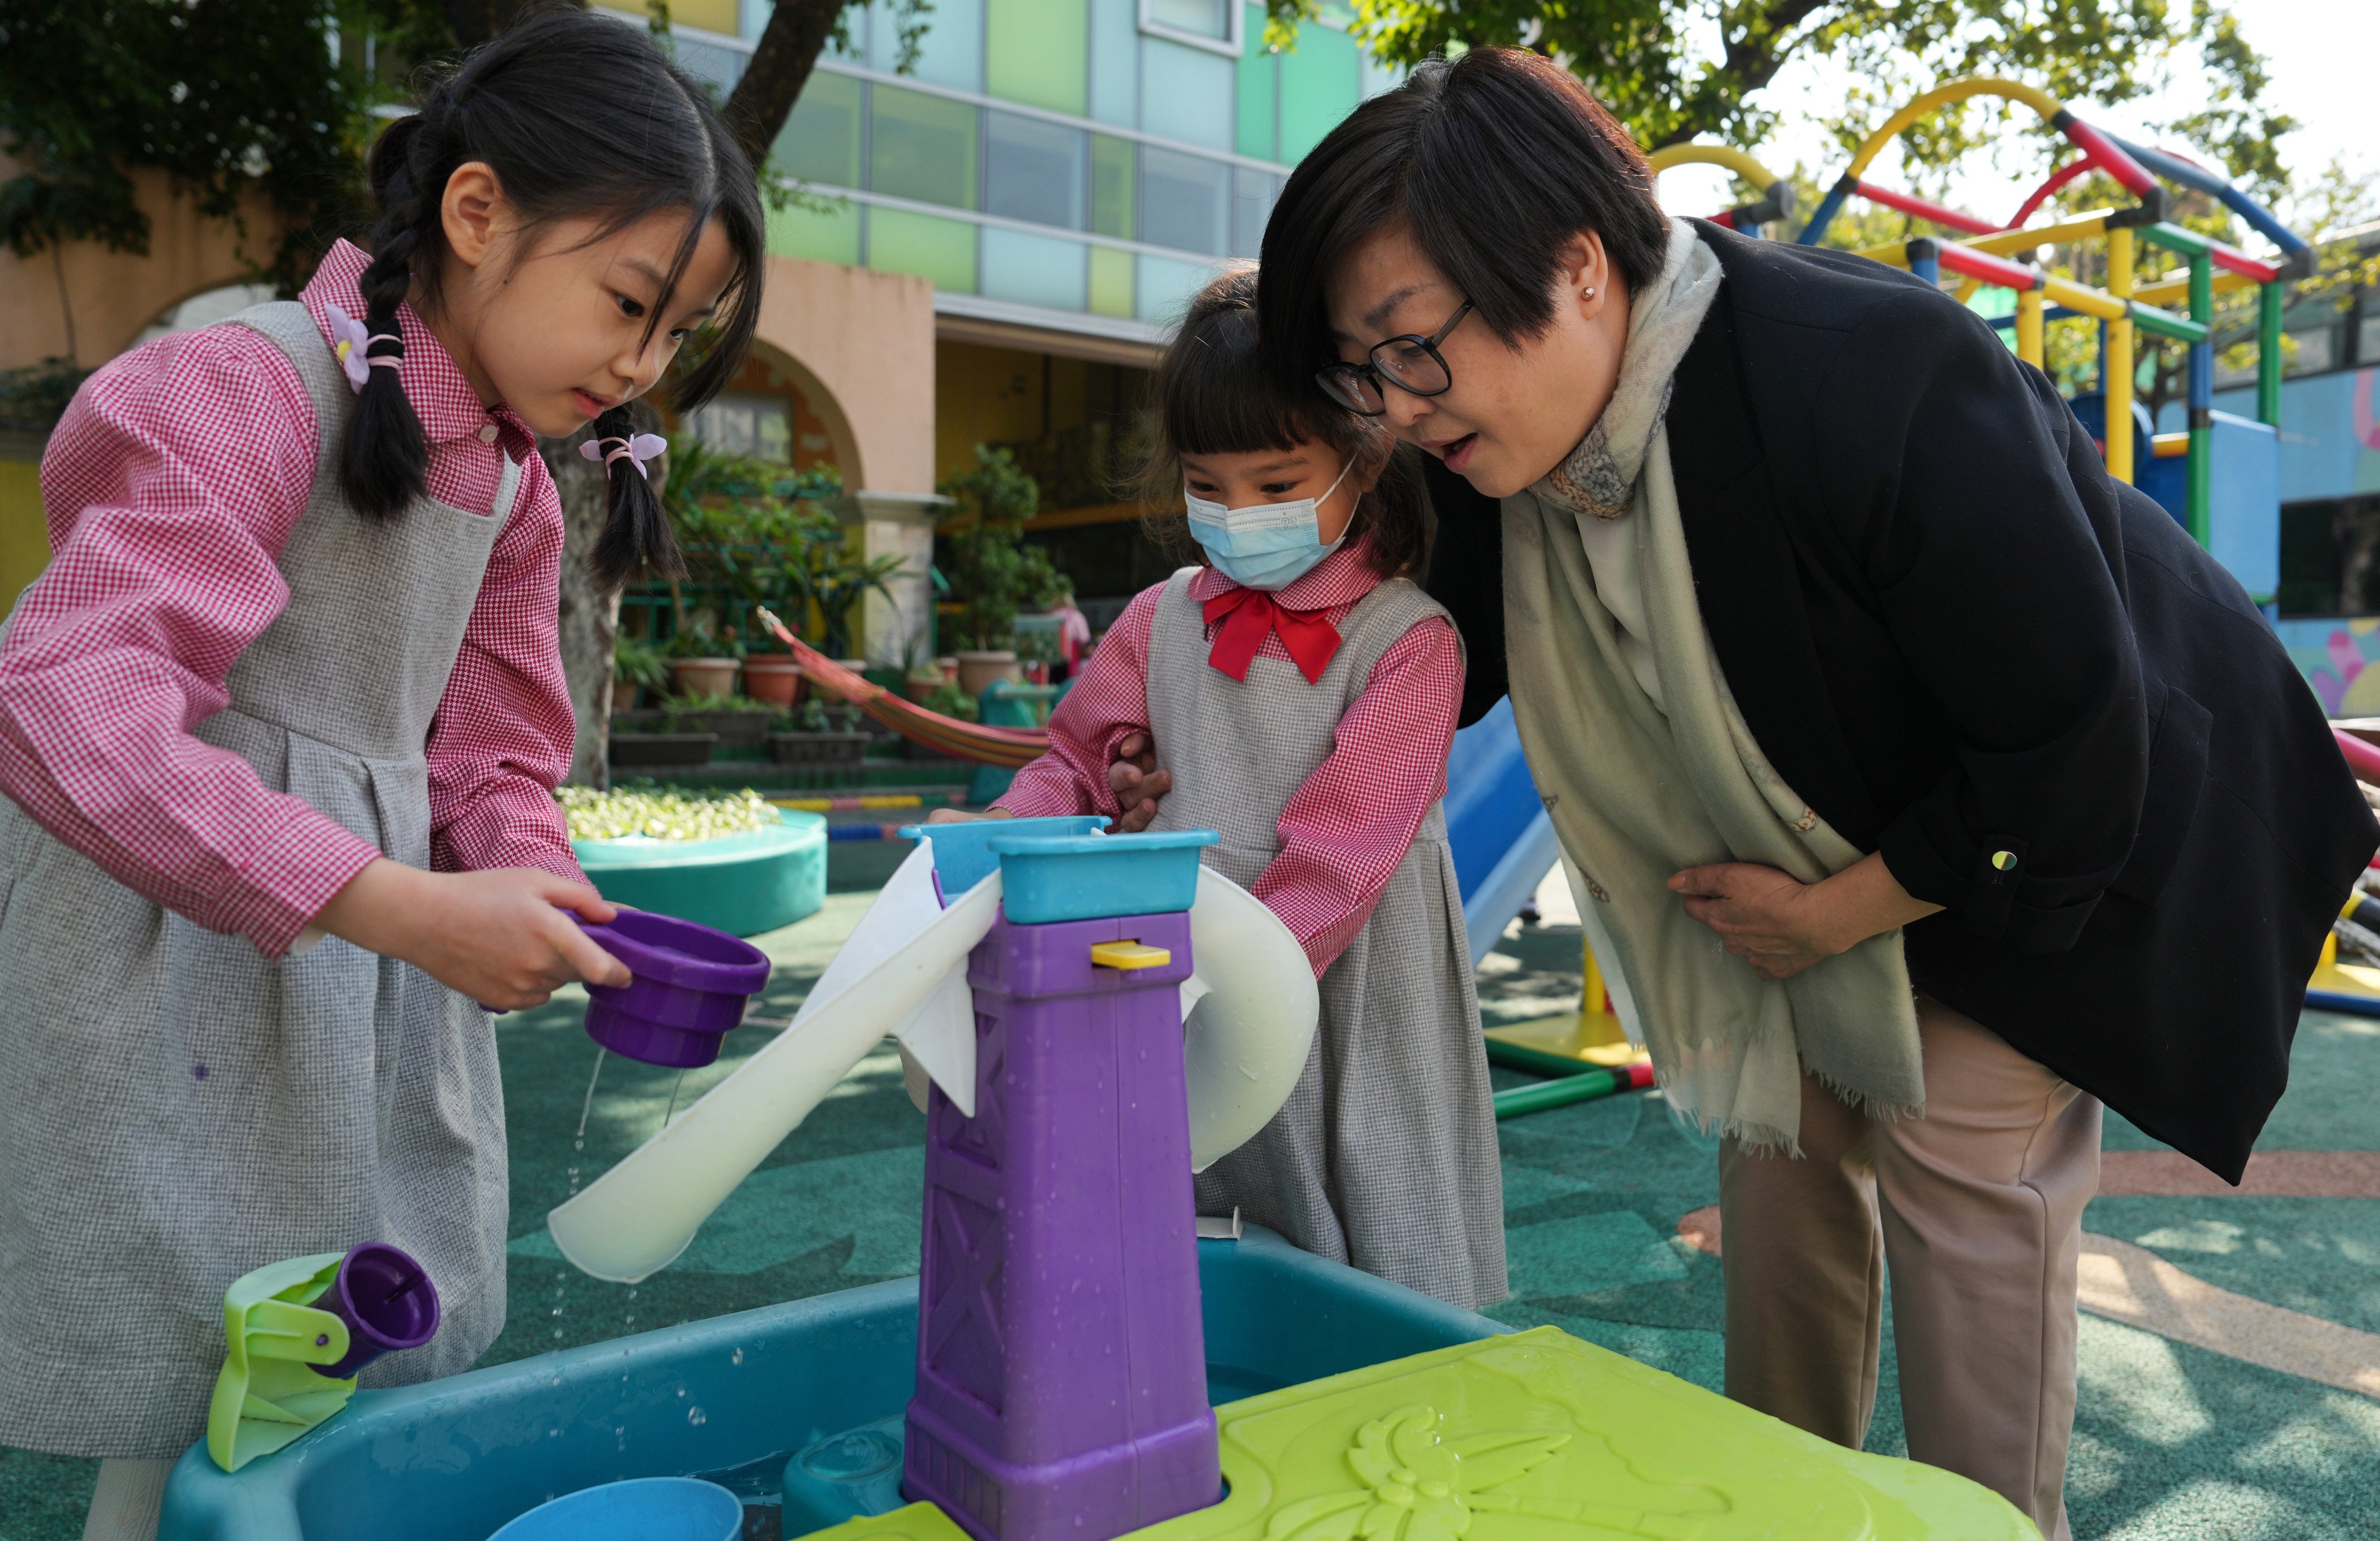 For younger ones, indoor and outdoor play is a key learning environment. Photo: Elson Li